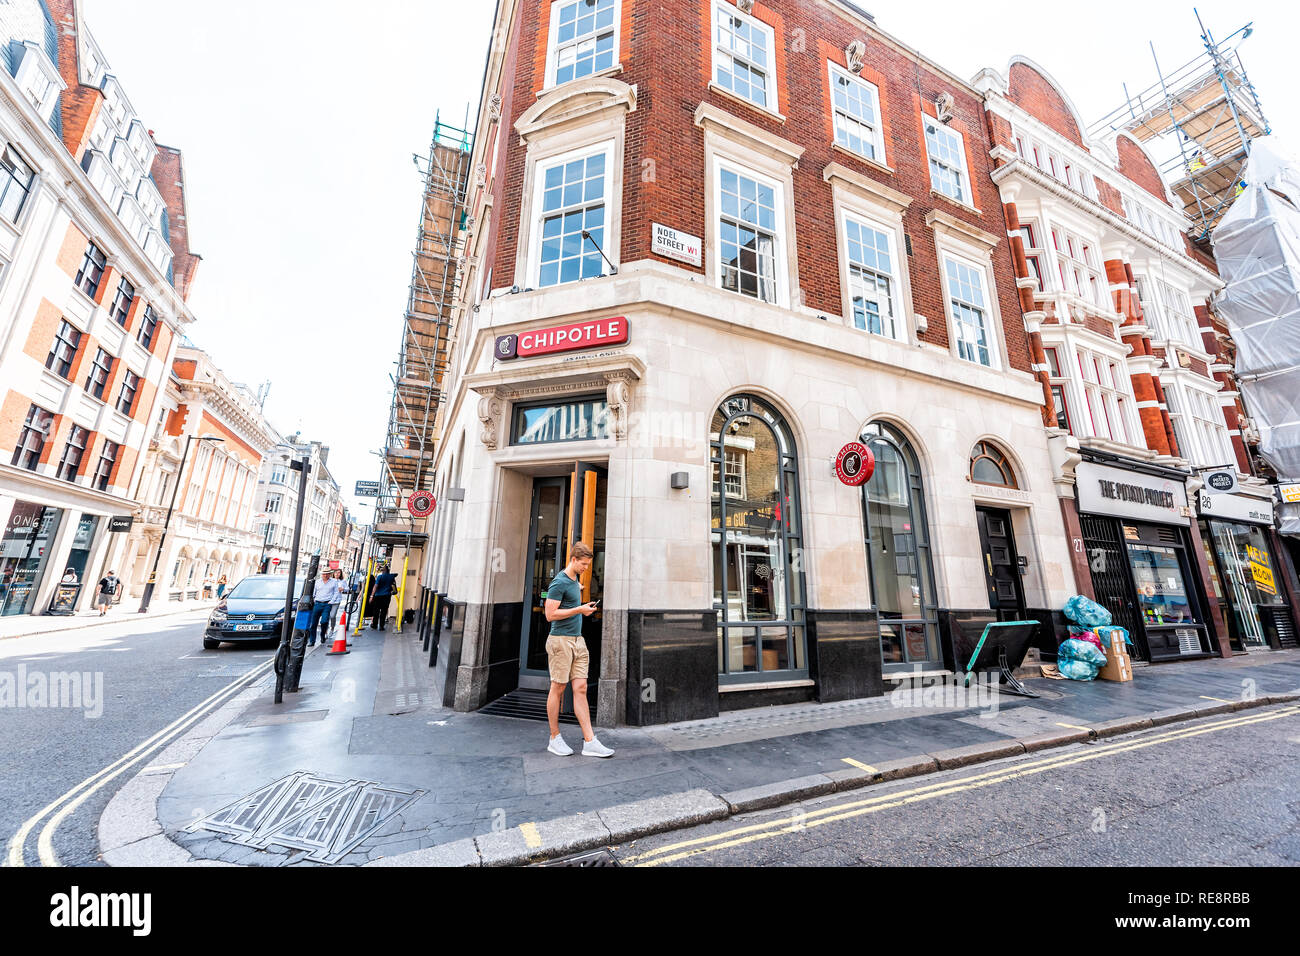 London, UK - June 24, 2018: Chipotle restaurant fast food store shop with man standing by entrance exterior in Soho with sign on historic brick buildi Stock Photo